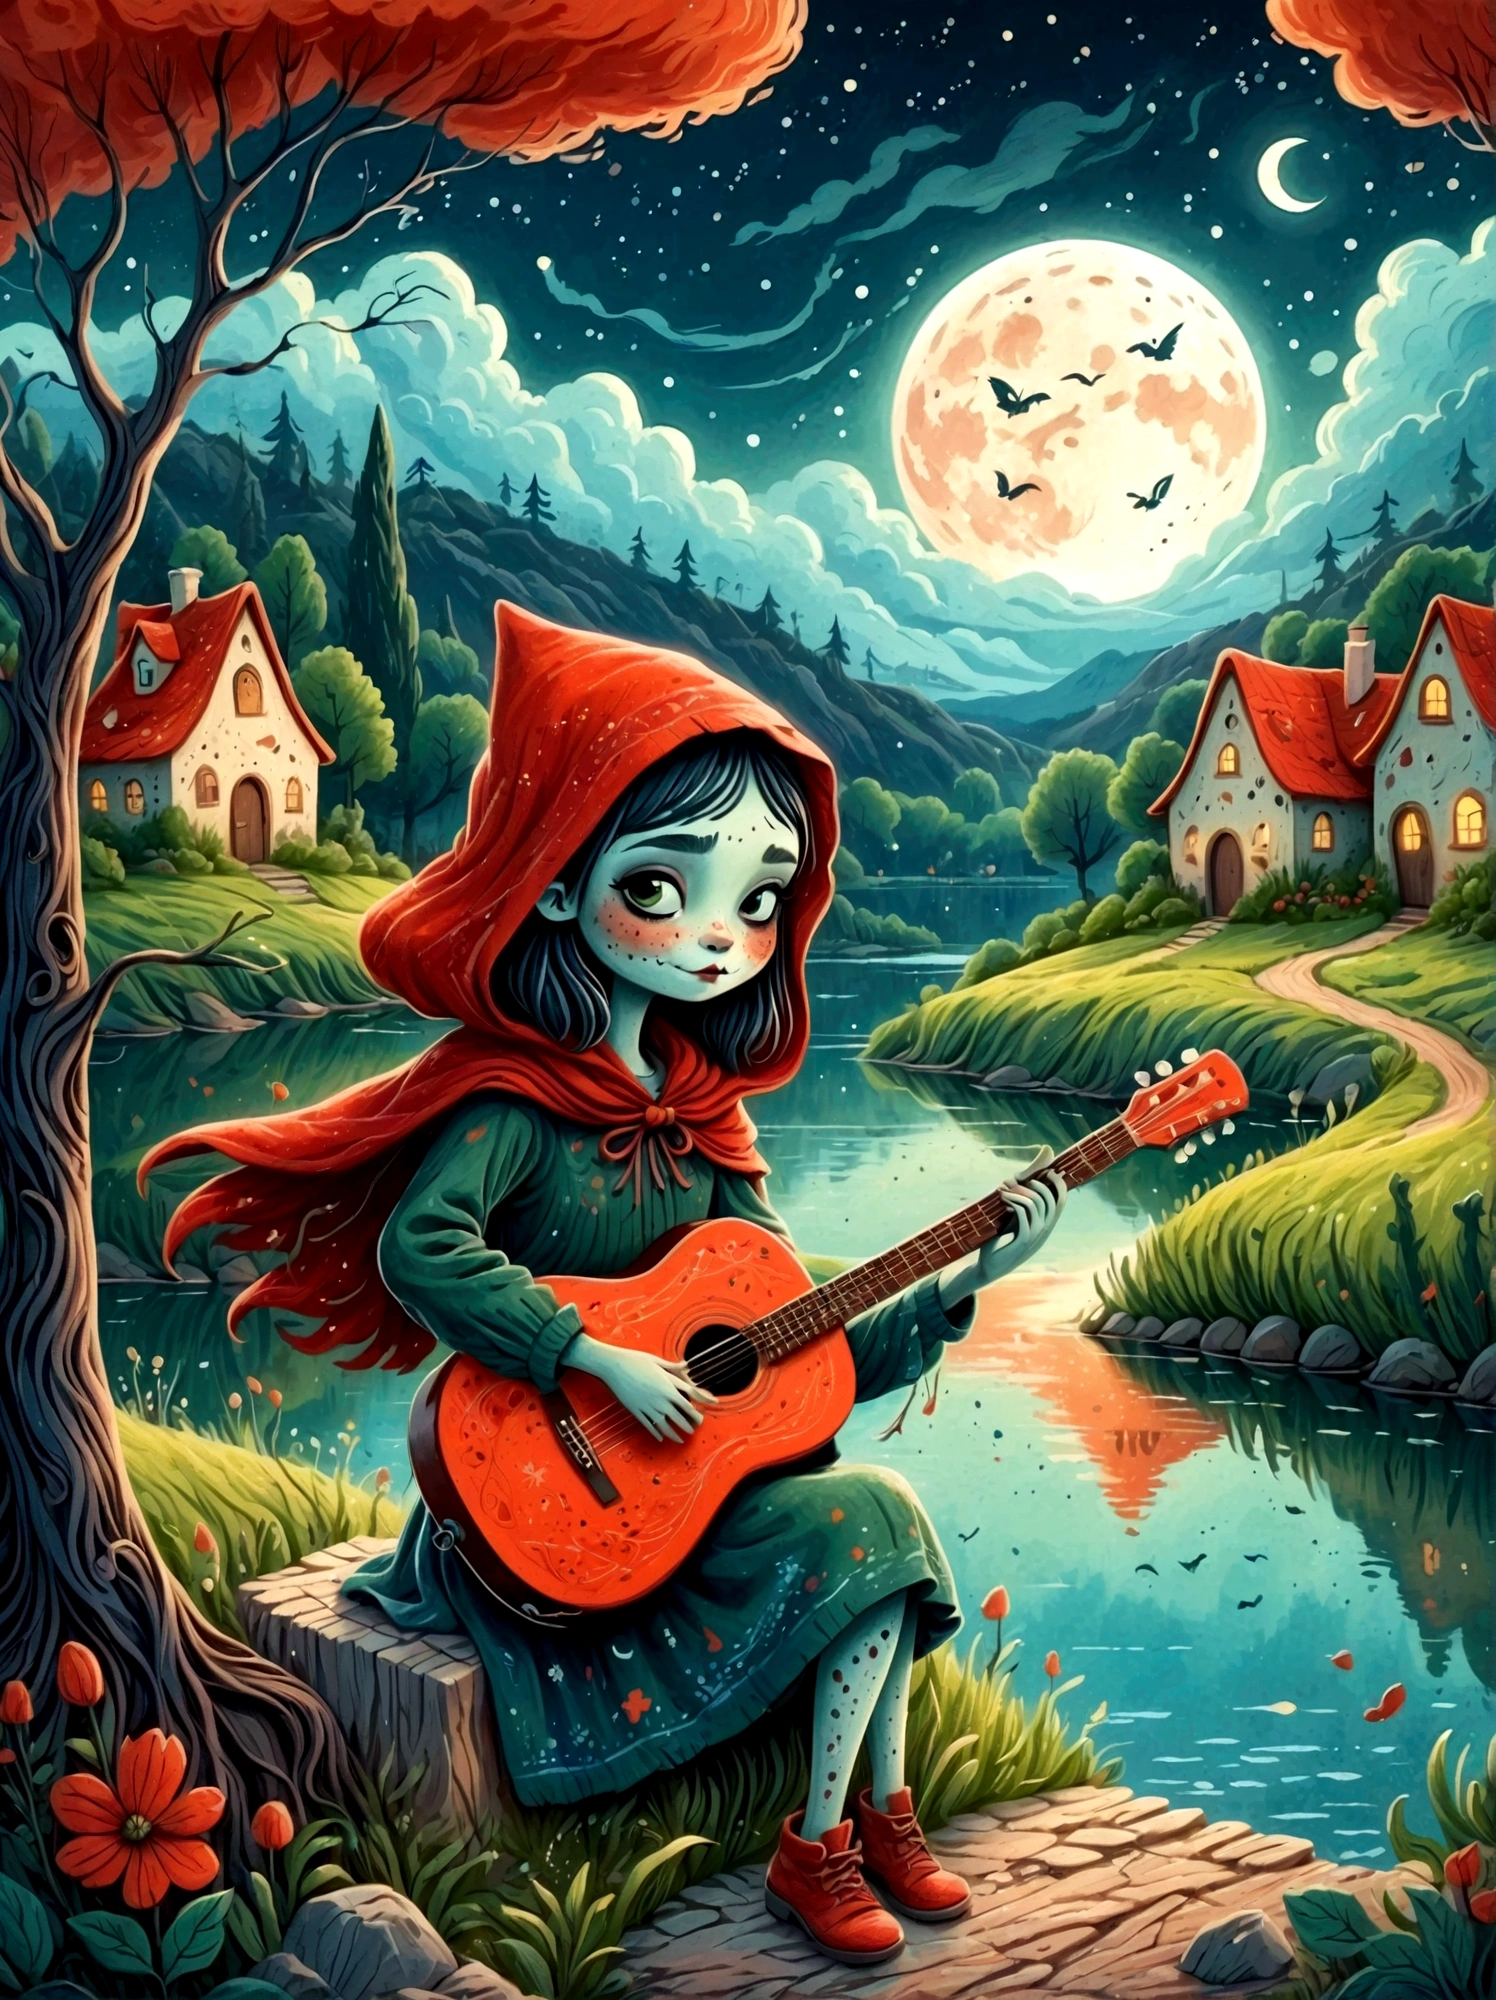 Cartoon hand drawn, 1girl, solo, Cute young charming little red riding hood girl，Strong zombie makeup, Playing an old guitar，the guitar player，Ghost Viewer，A dilapidated village by the lake, a dark forest and a vineyard，Starry nights，Gloomy and foggy atmosphere，The cute absurdity，The attraction and rejection of extraordinary appearance，Magical naive art，Bright blue and green，The color palette is in red, orange and black tones and has a sketchy style, The background should have a simple hand-drawn doodle pattern, 1shxx1